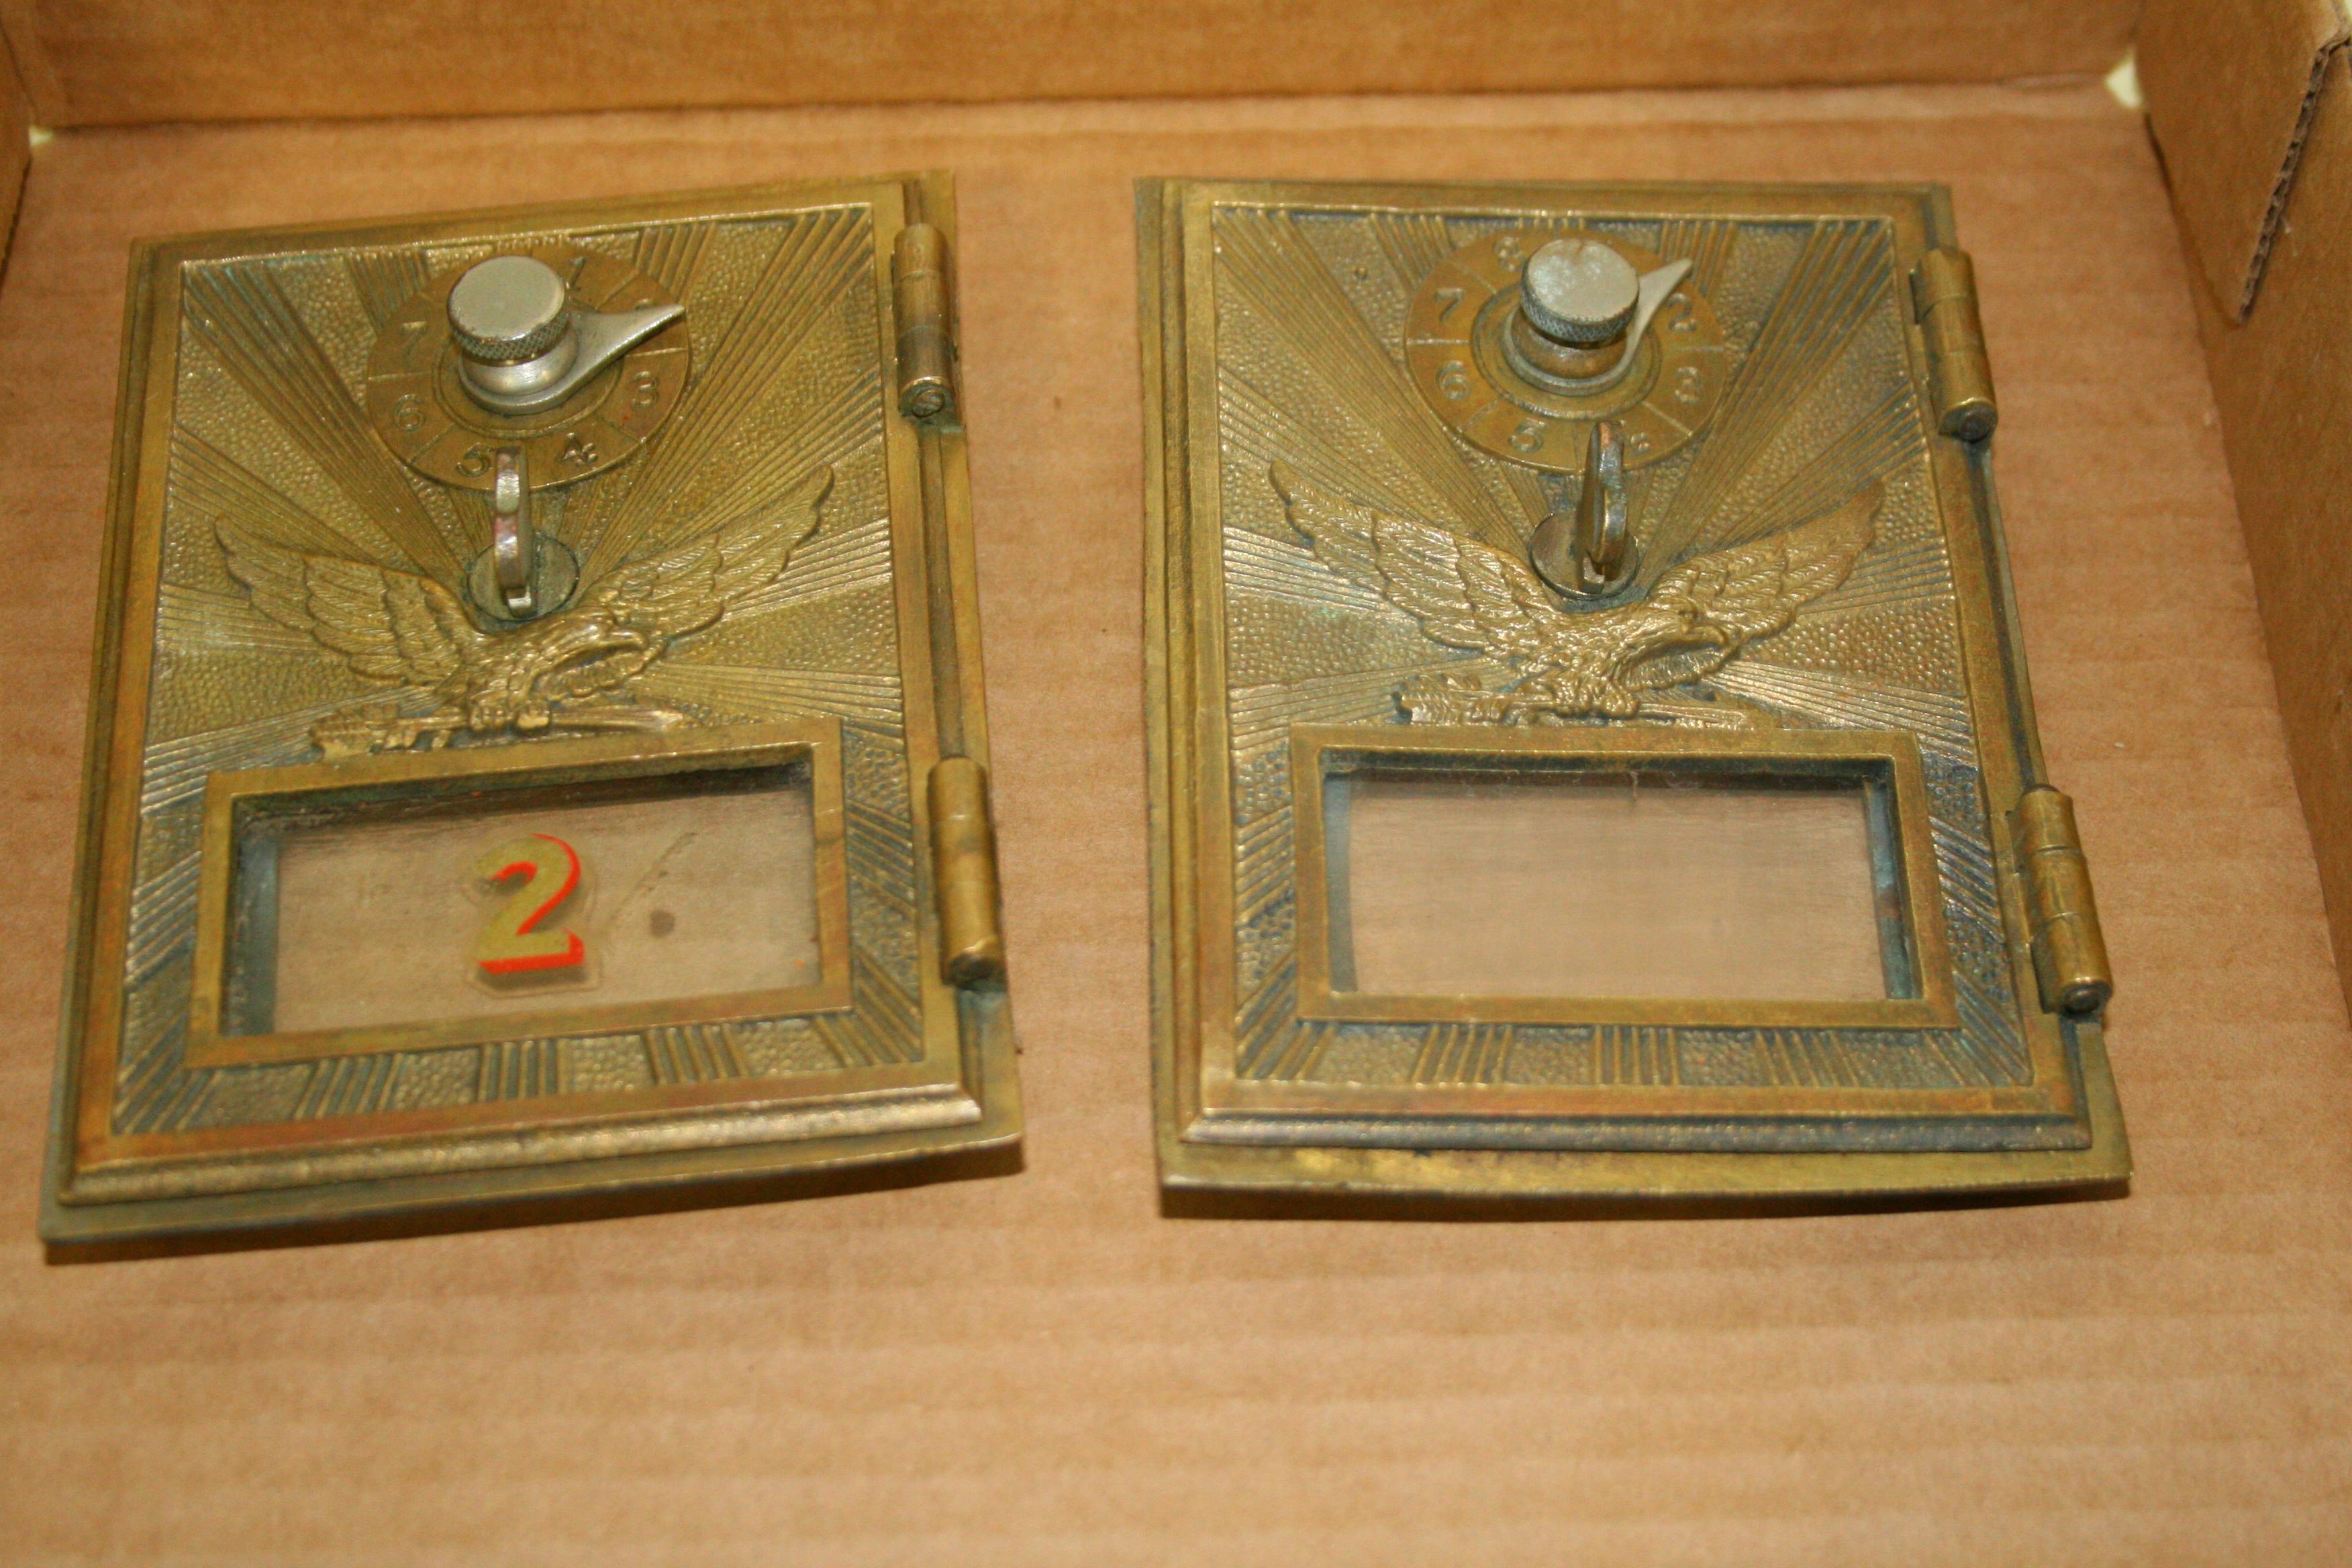 4 BRASS STYLE SMALL POST OFFICE BOX DOORS - NO COMBINATIONS